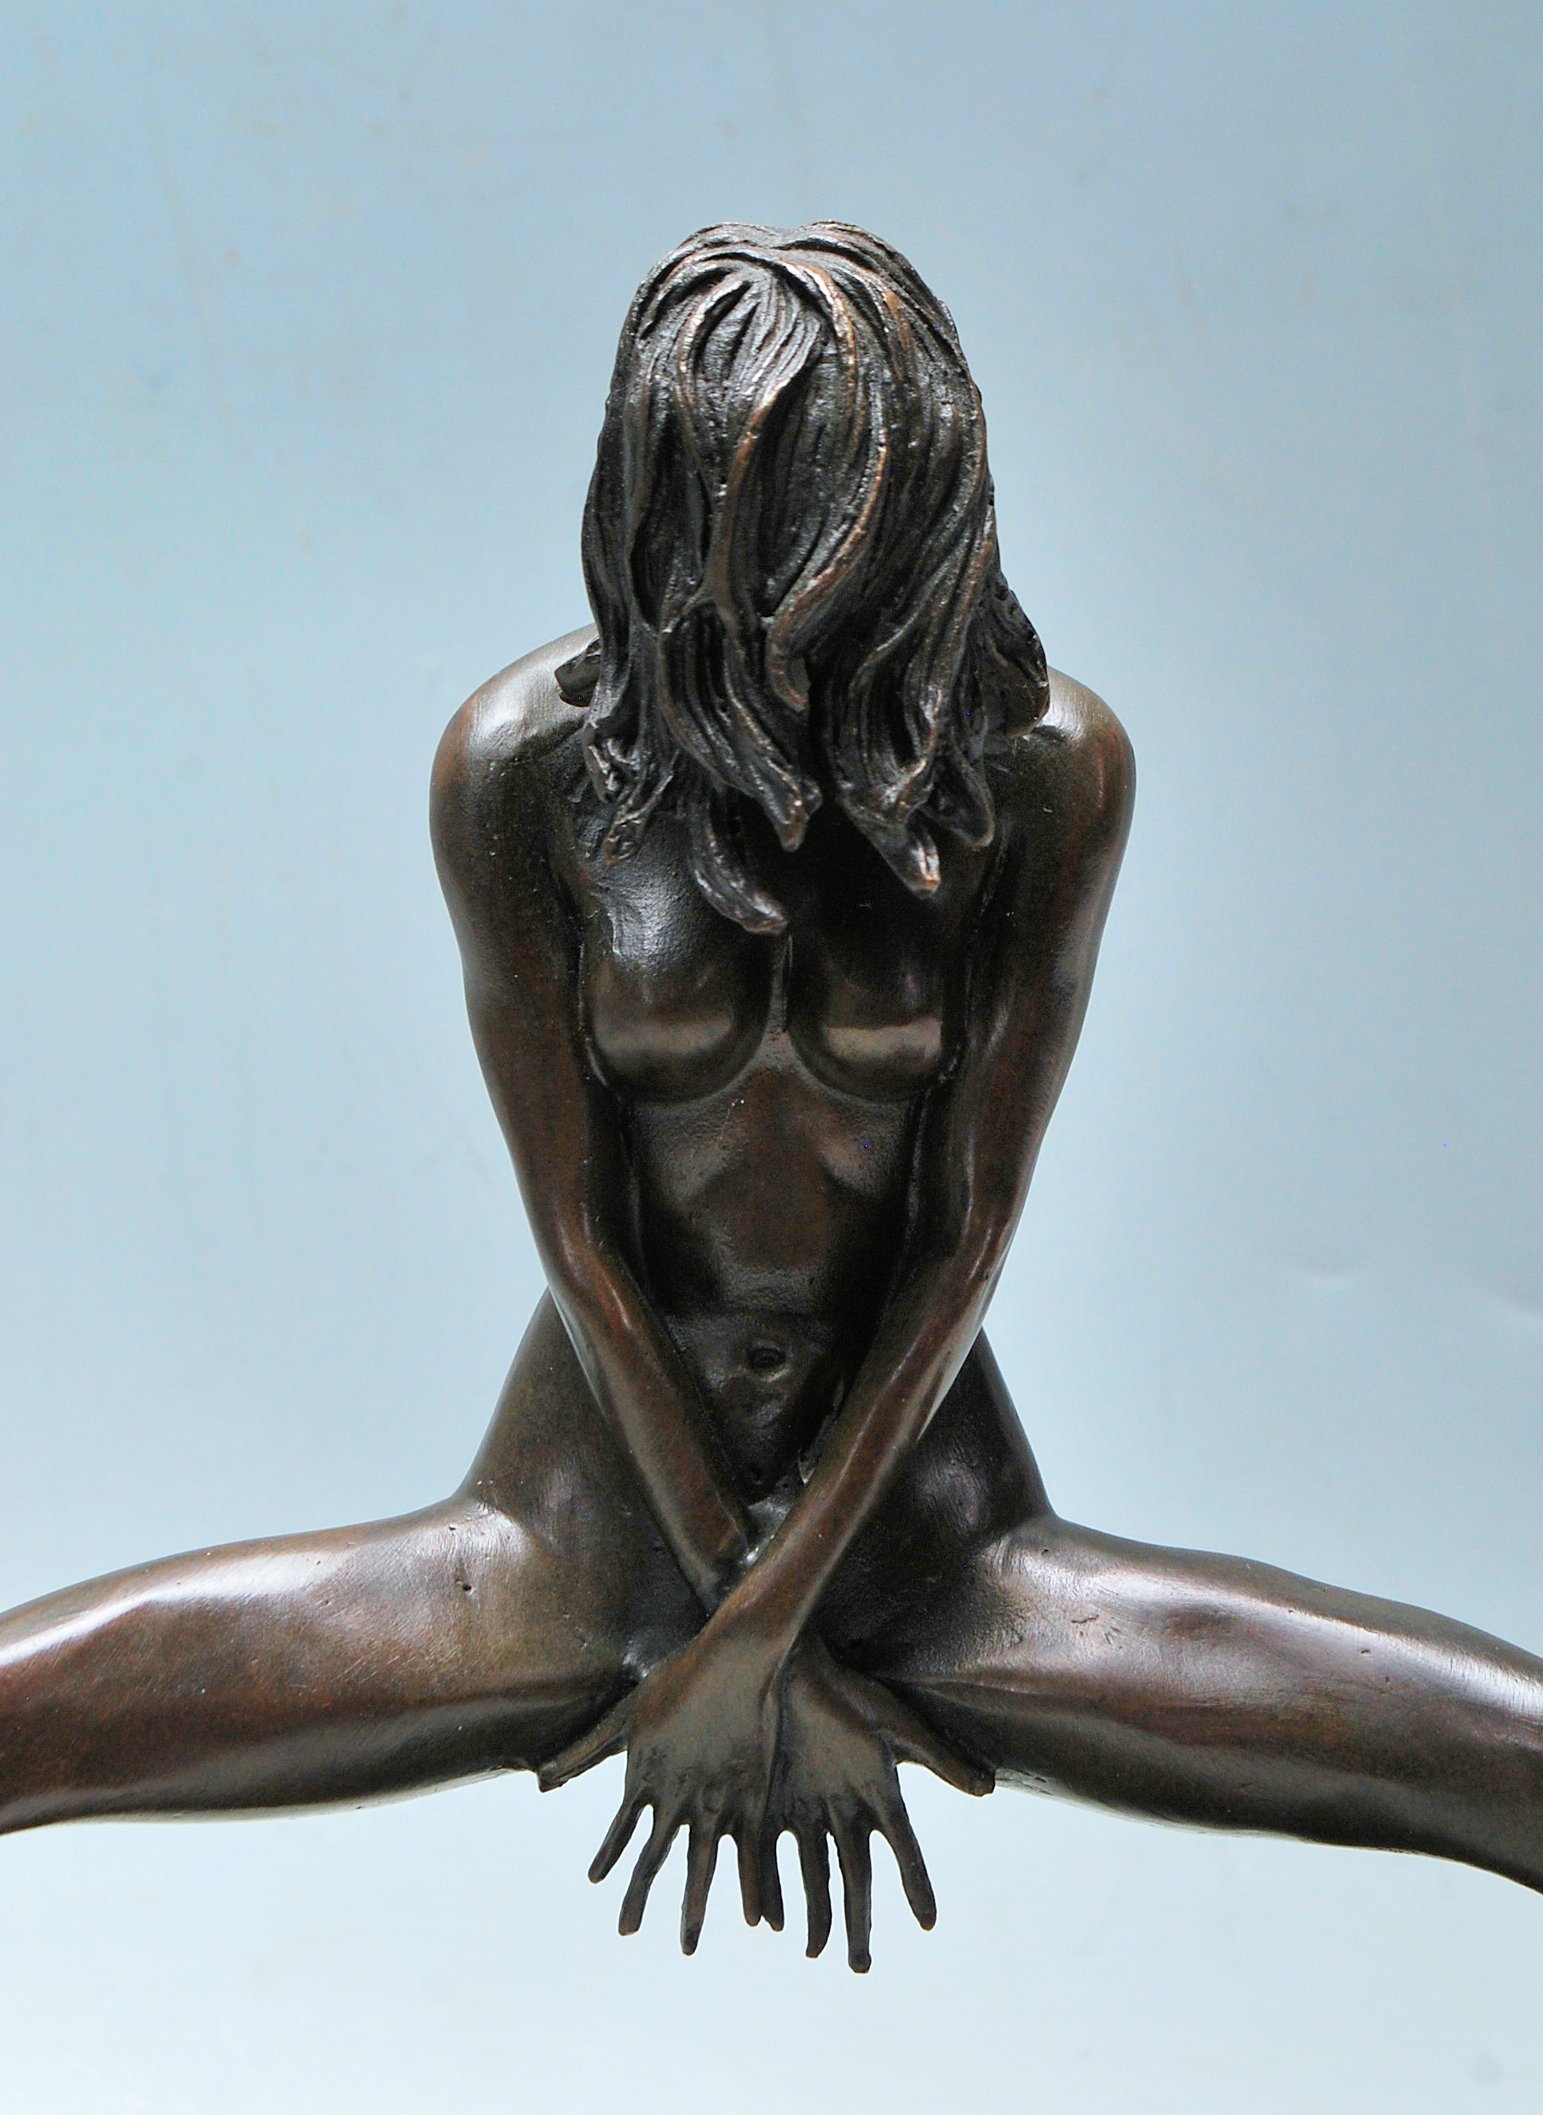 CONTEMPORARY FRENCH BRONZEOF A FEMALE NUDE POSING - Image 2 of 5